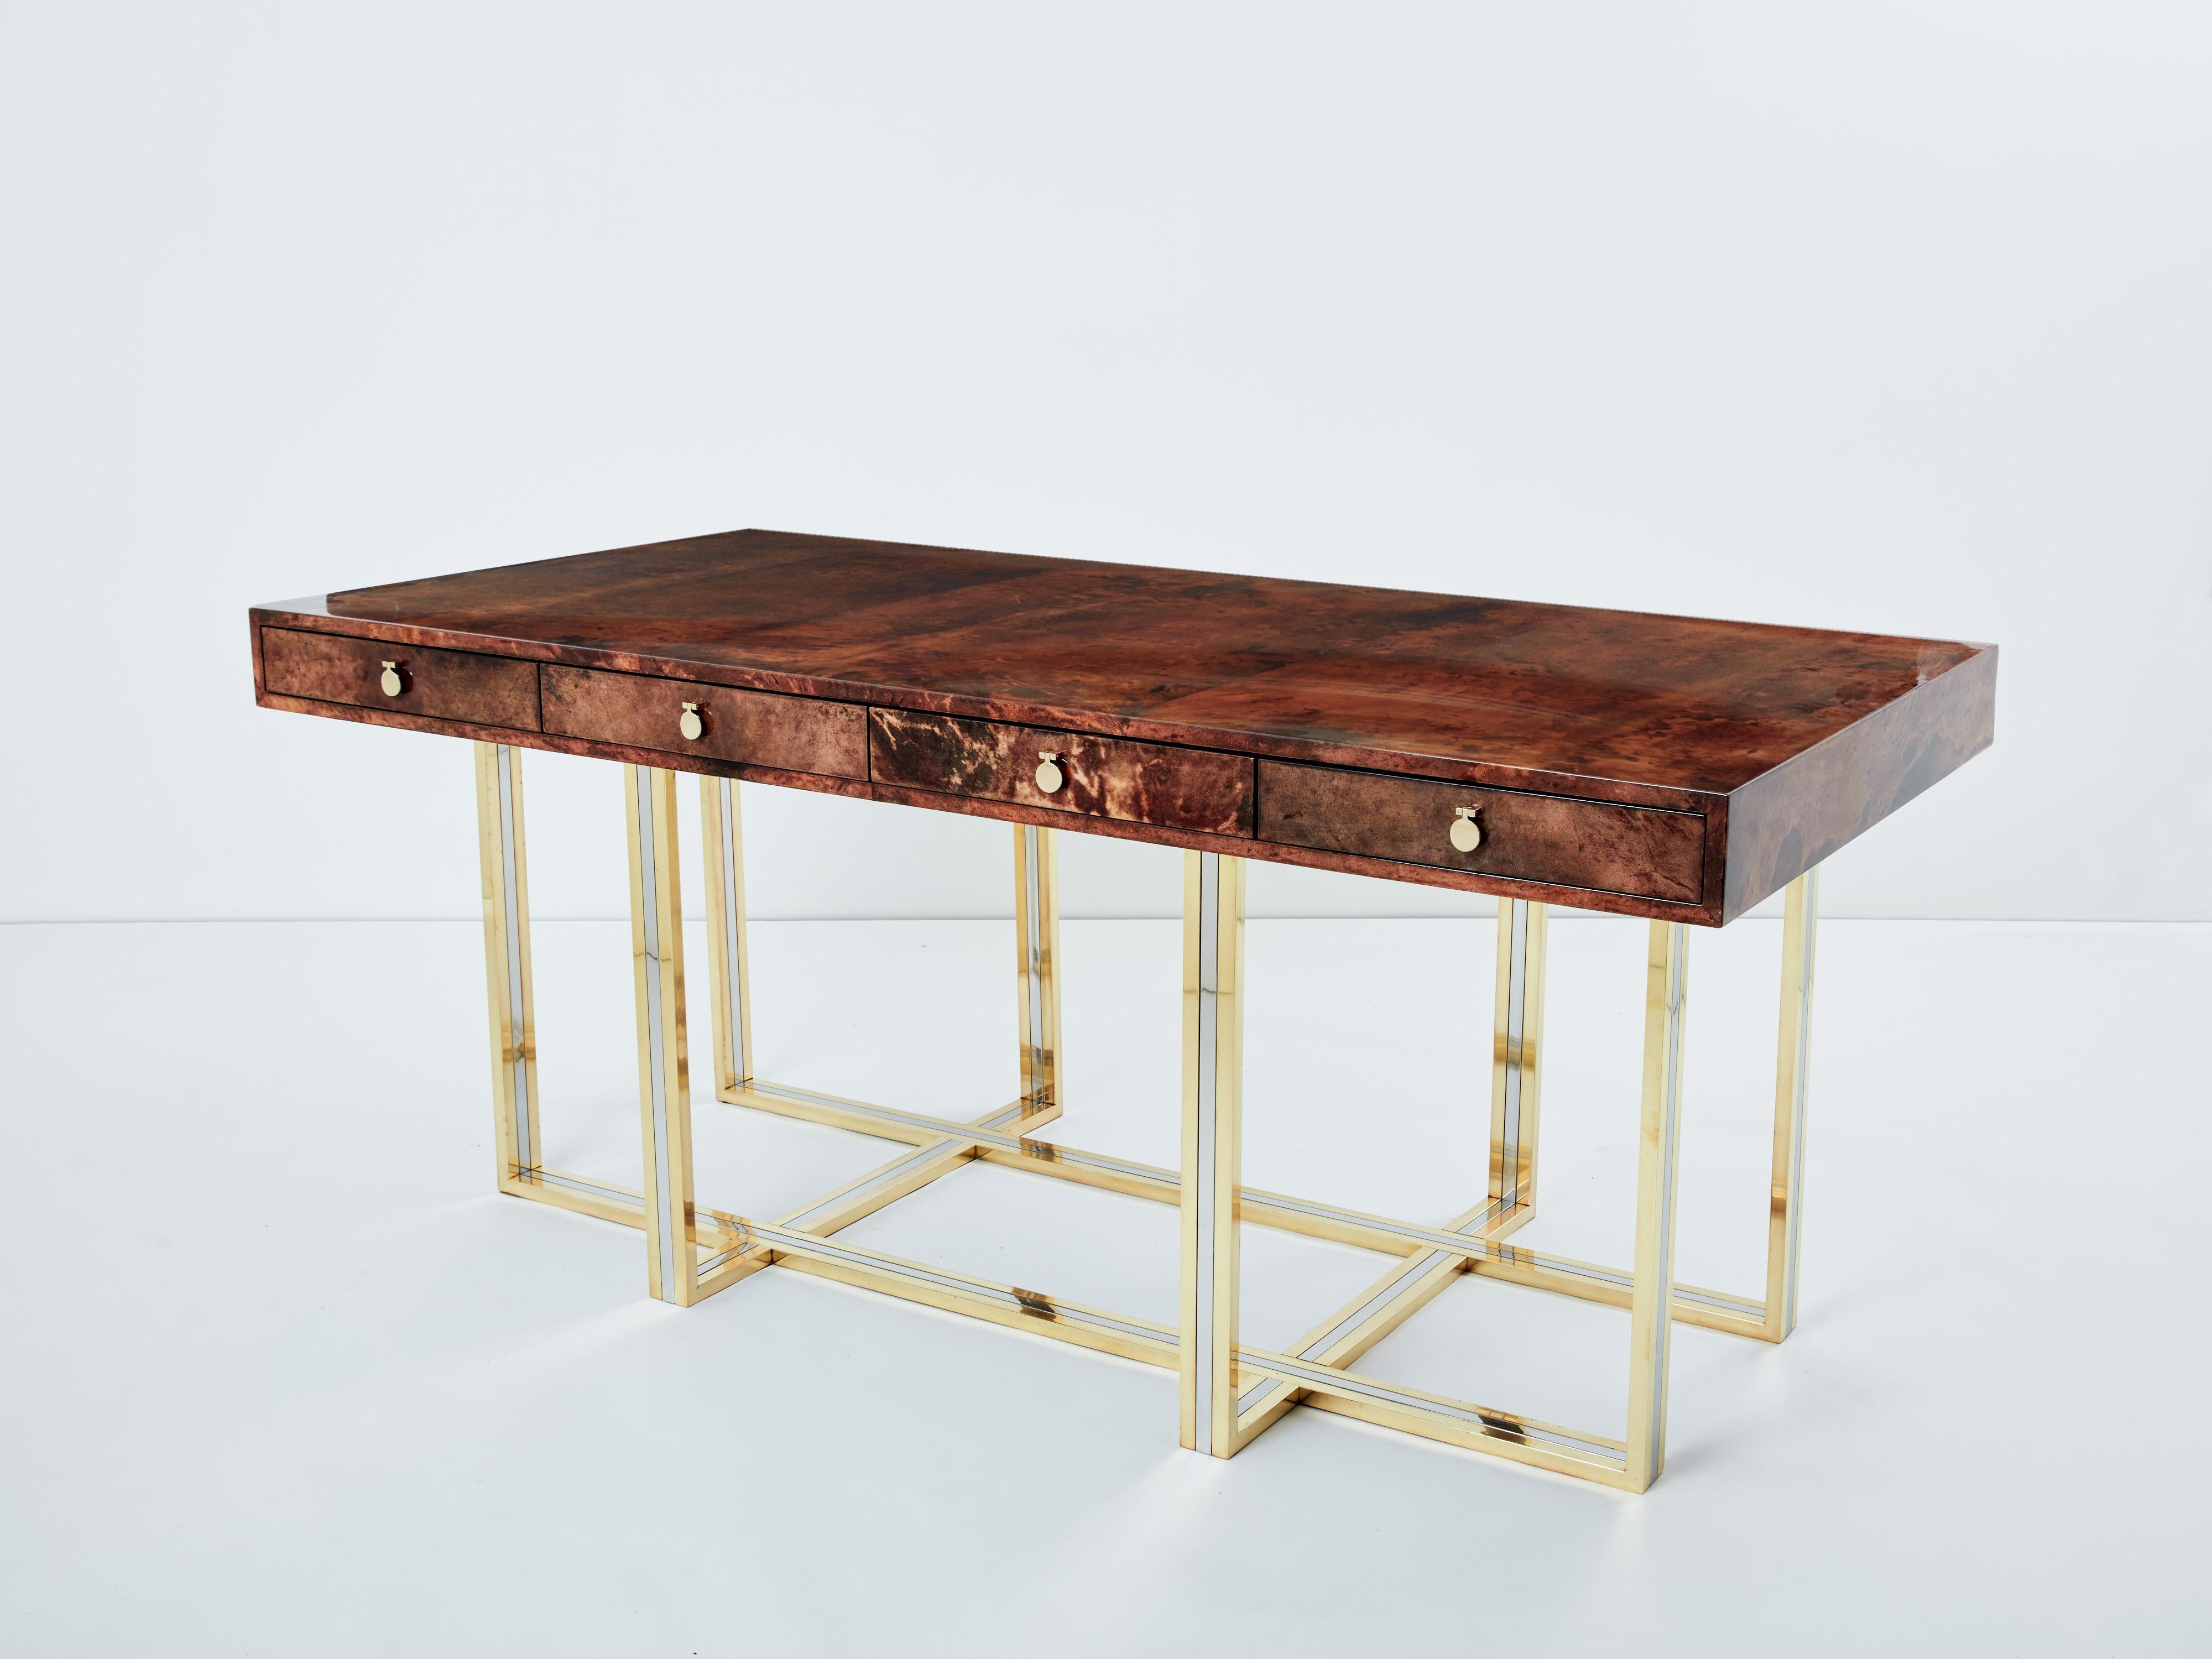 This unique Aldo Tura desk was produced in Italy in the late 1960s, and really feels imposing and glamorous. The varnished goatskin parchment, in rich shades of brown and dark brown, makes this desk typical of designer Aldo Tura signature. It